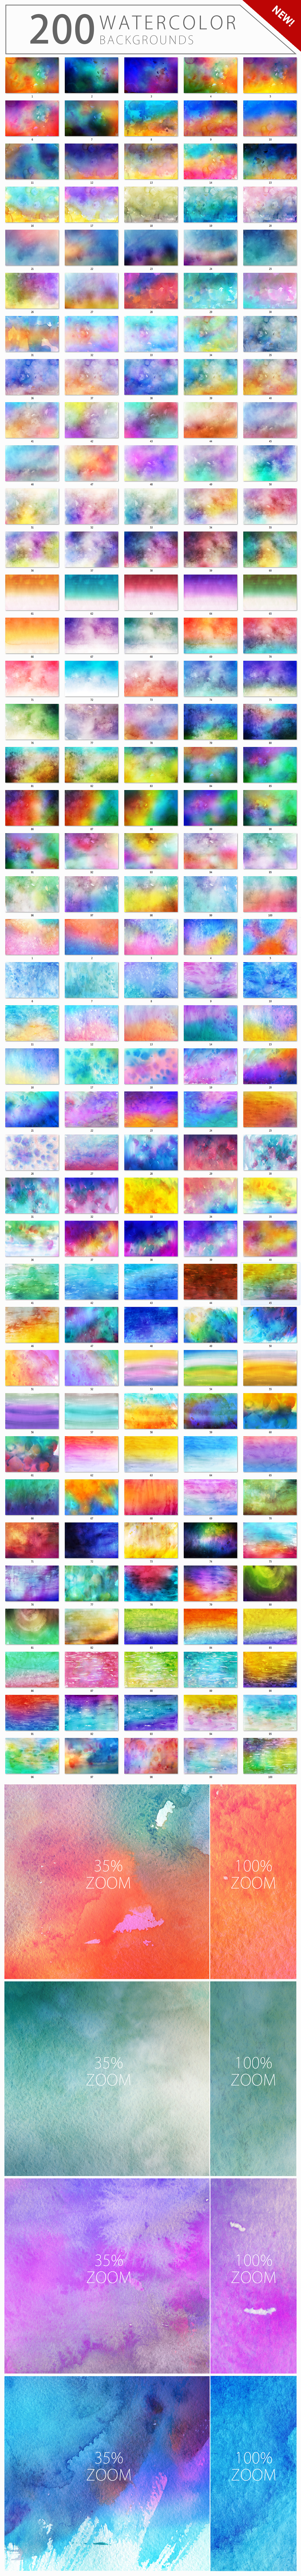  watercolor background - 4